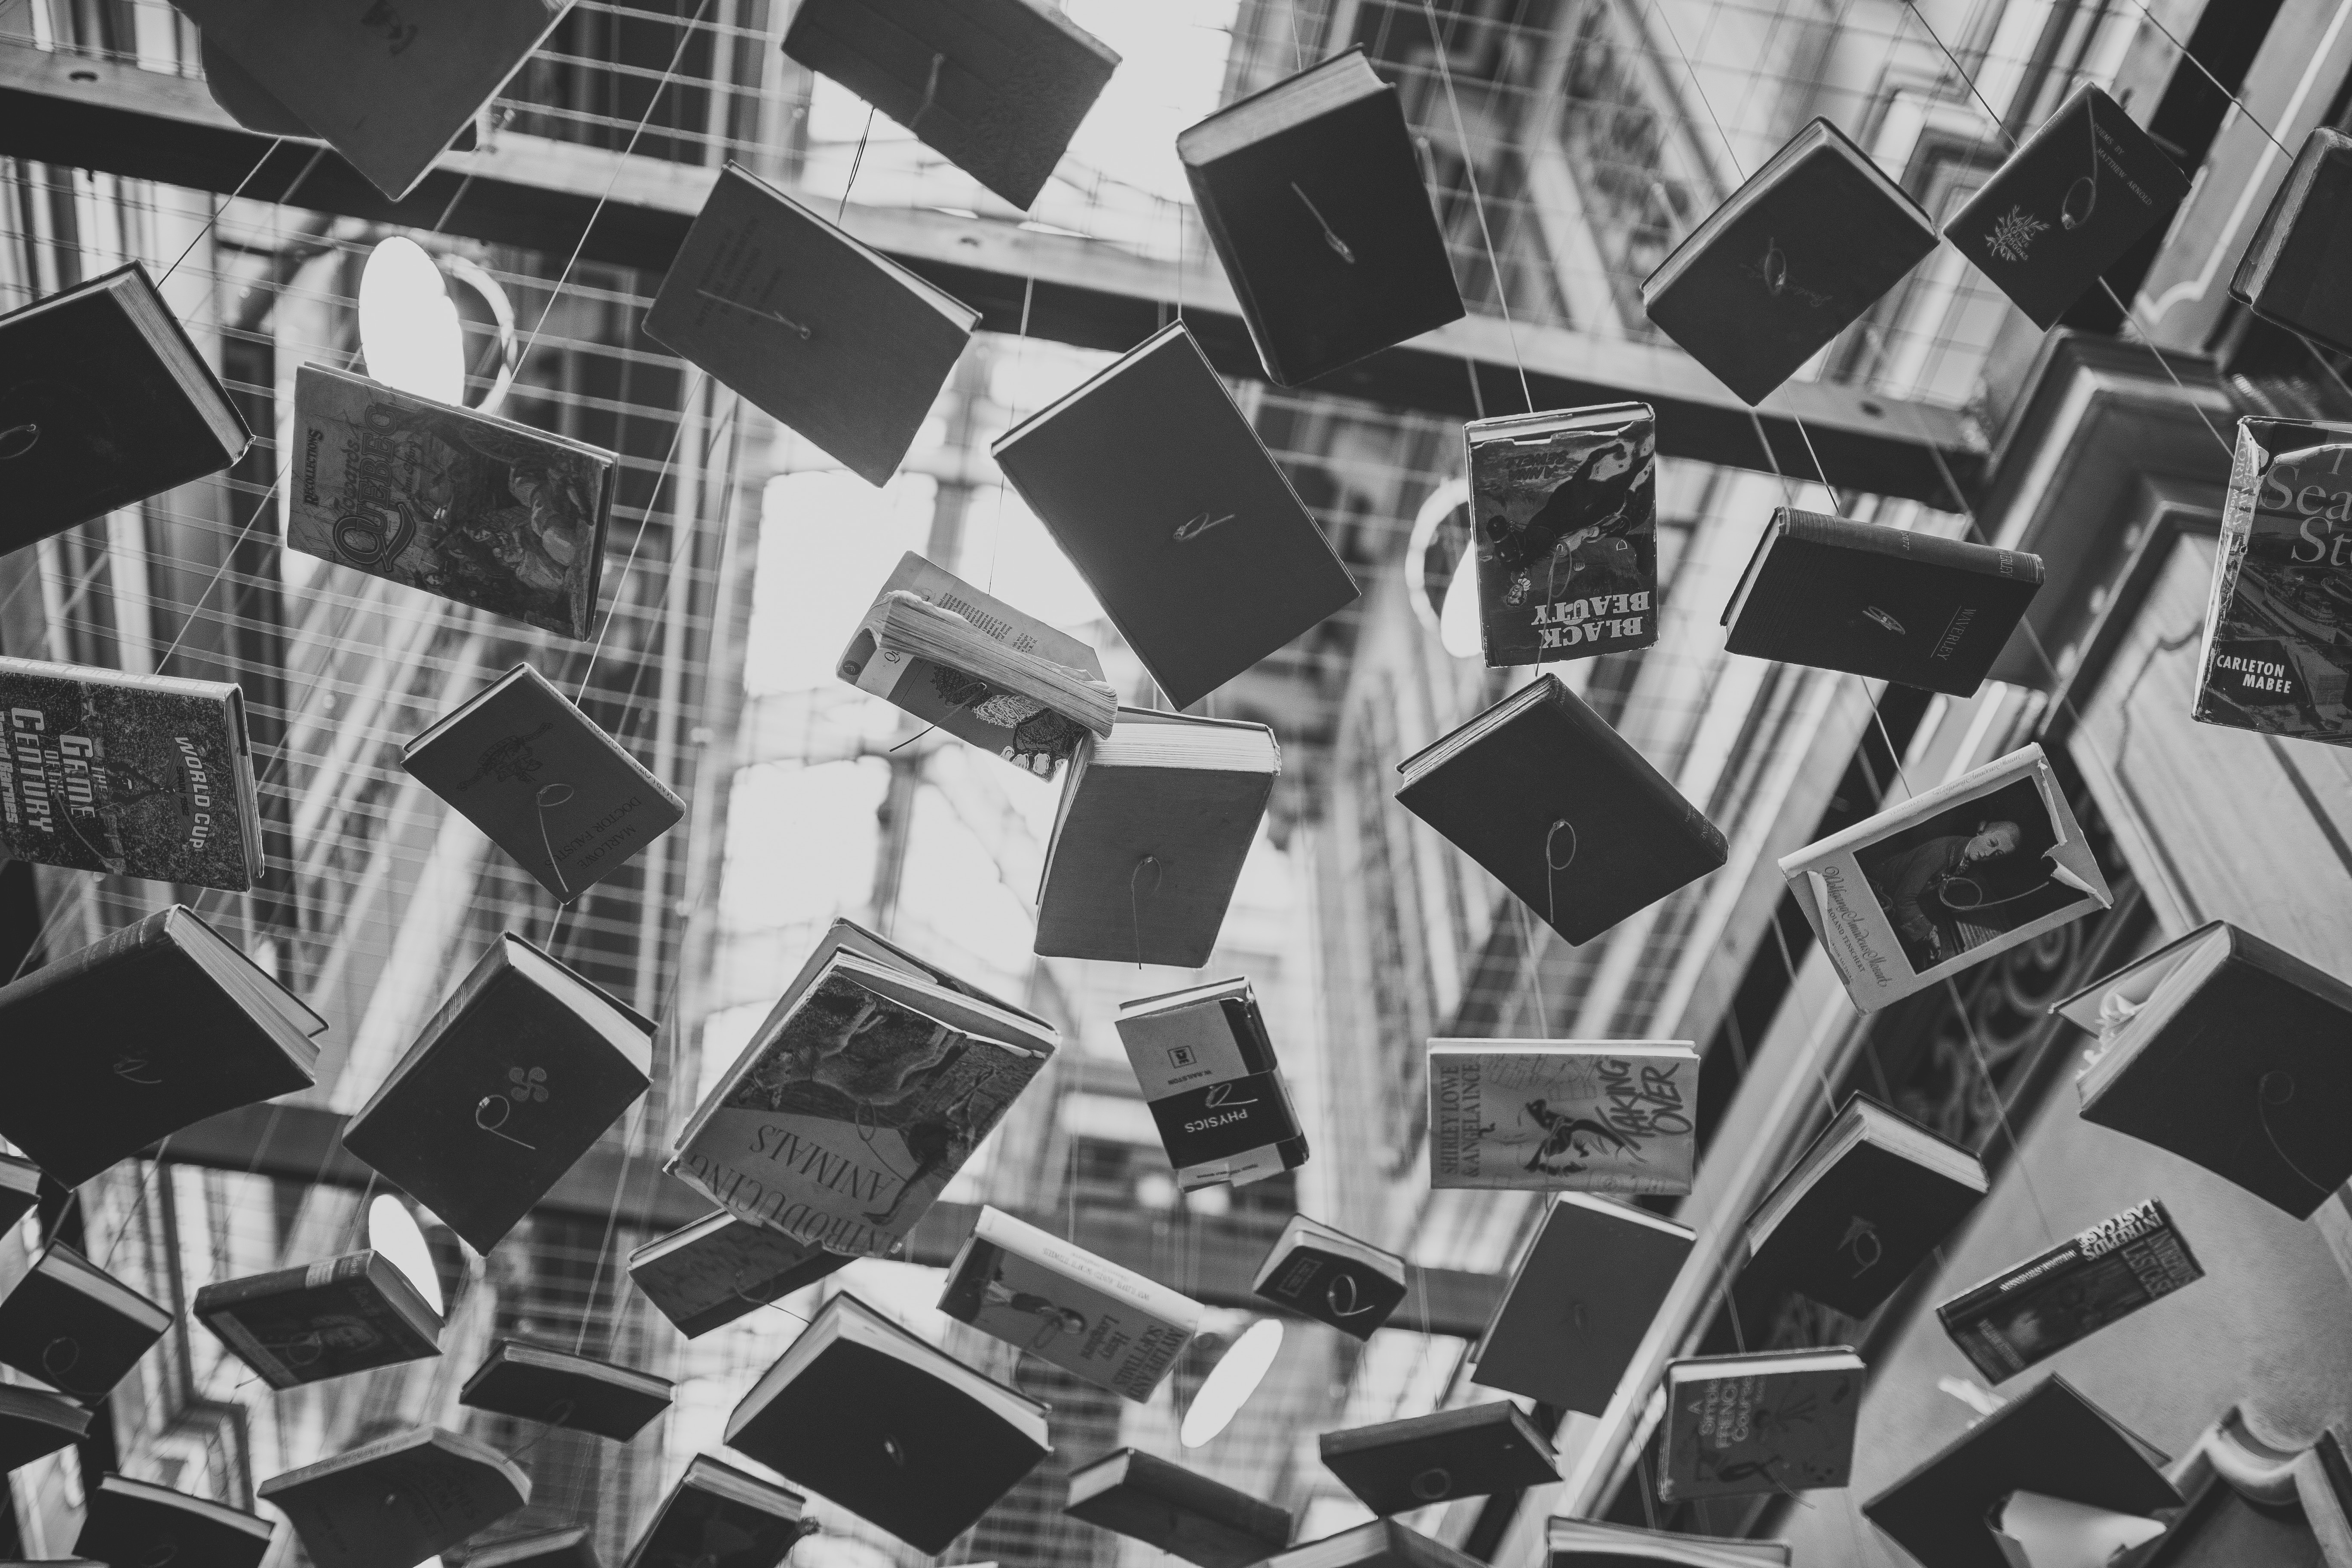 grayscale photo of assorted books hanging on the air